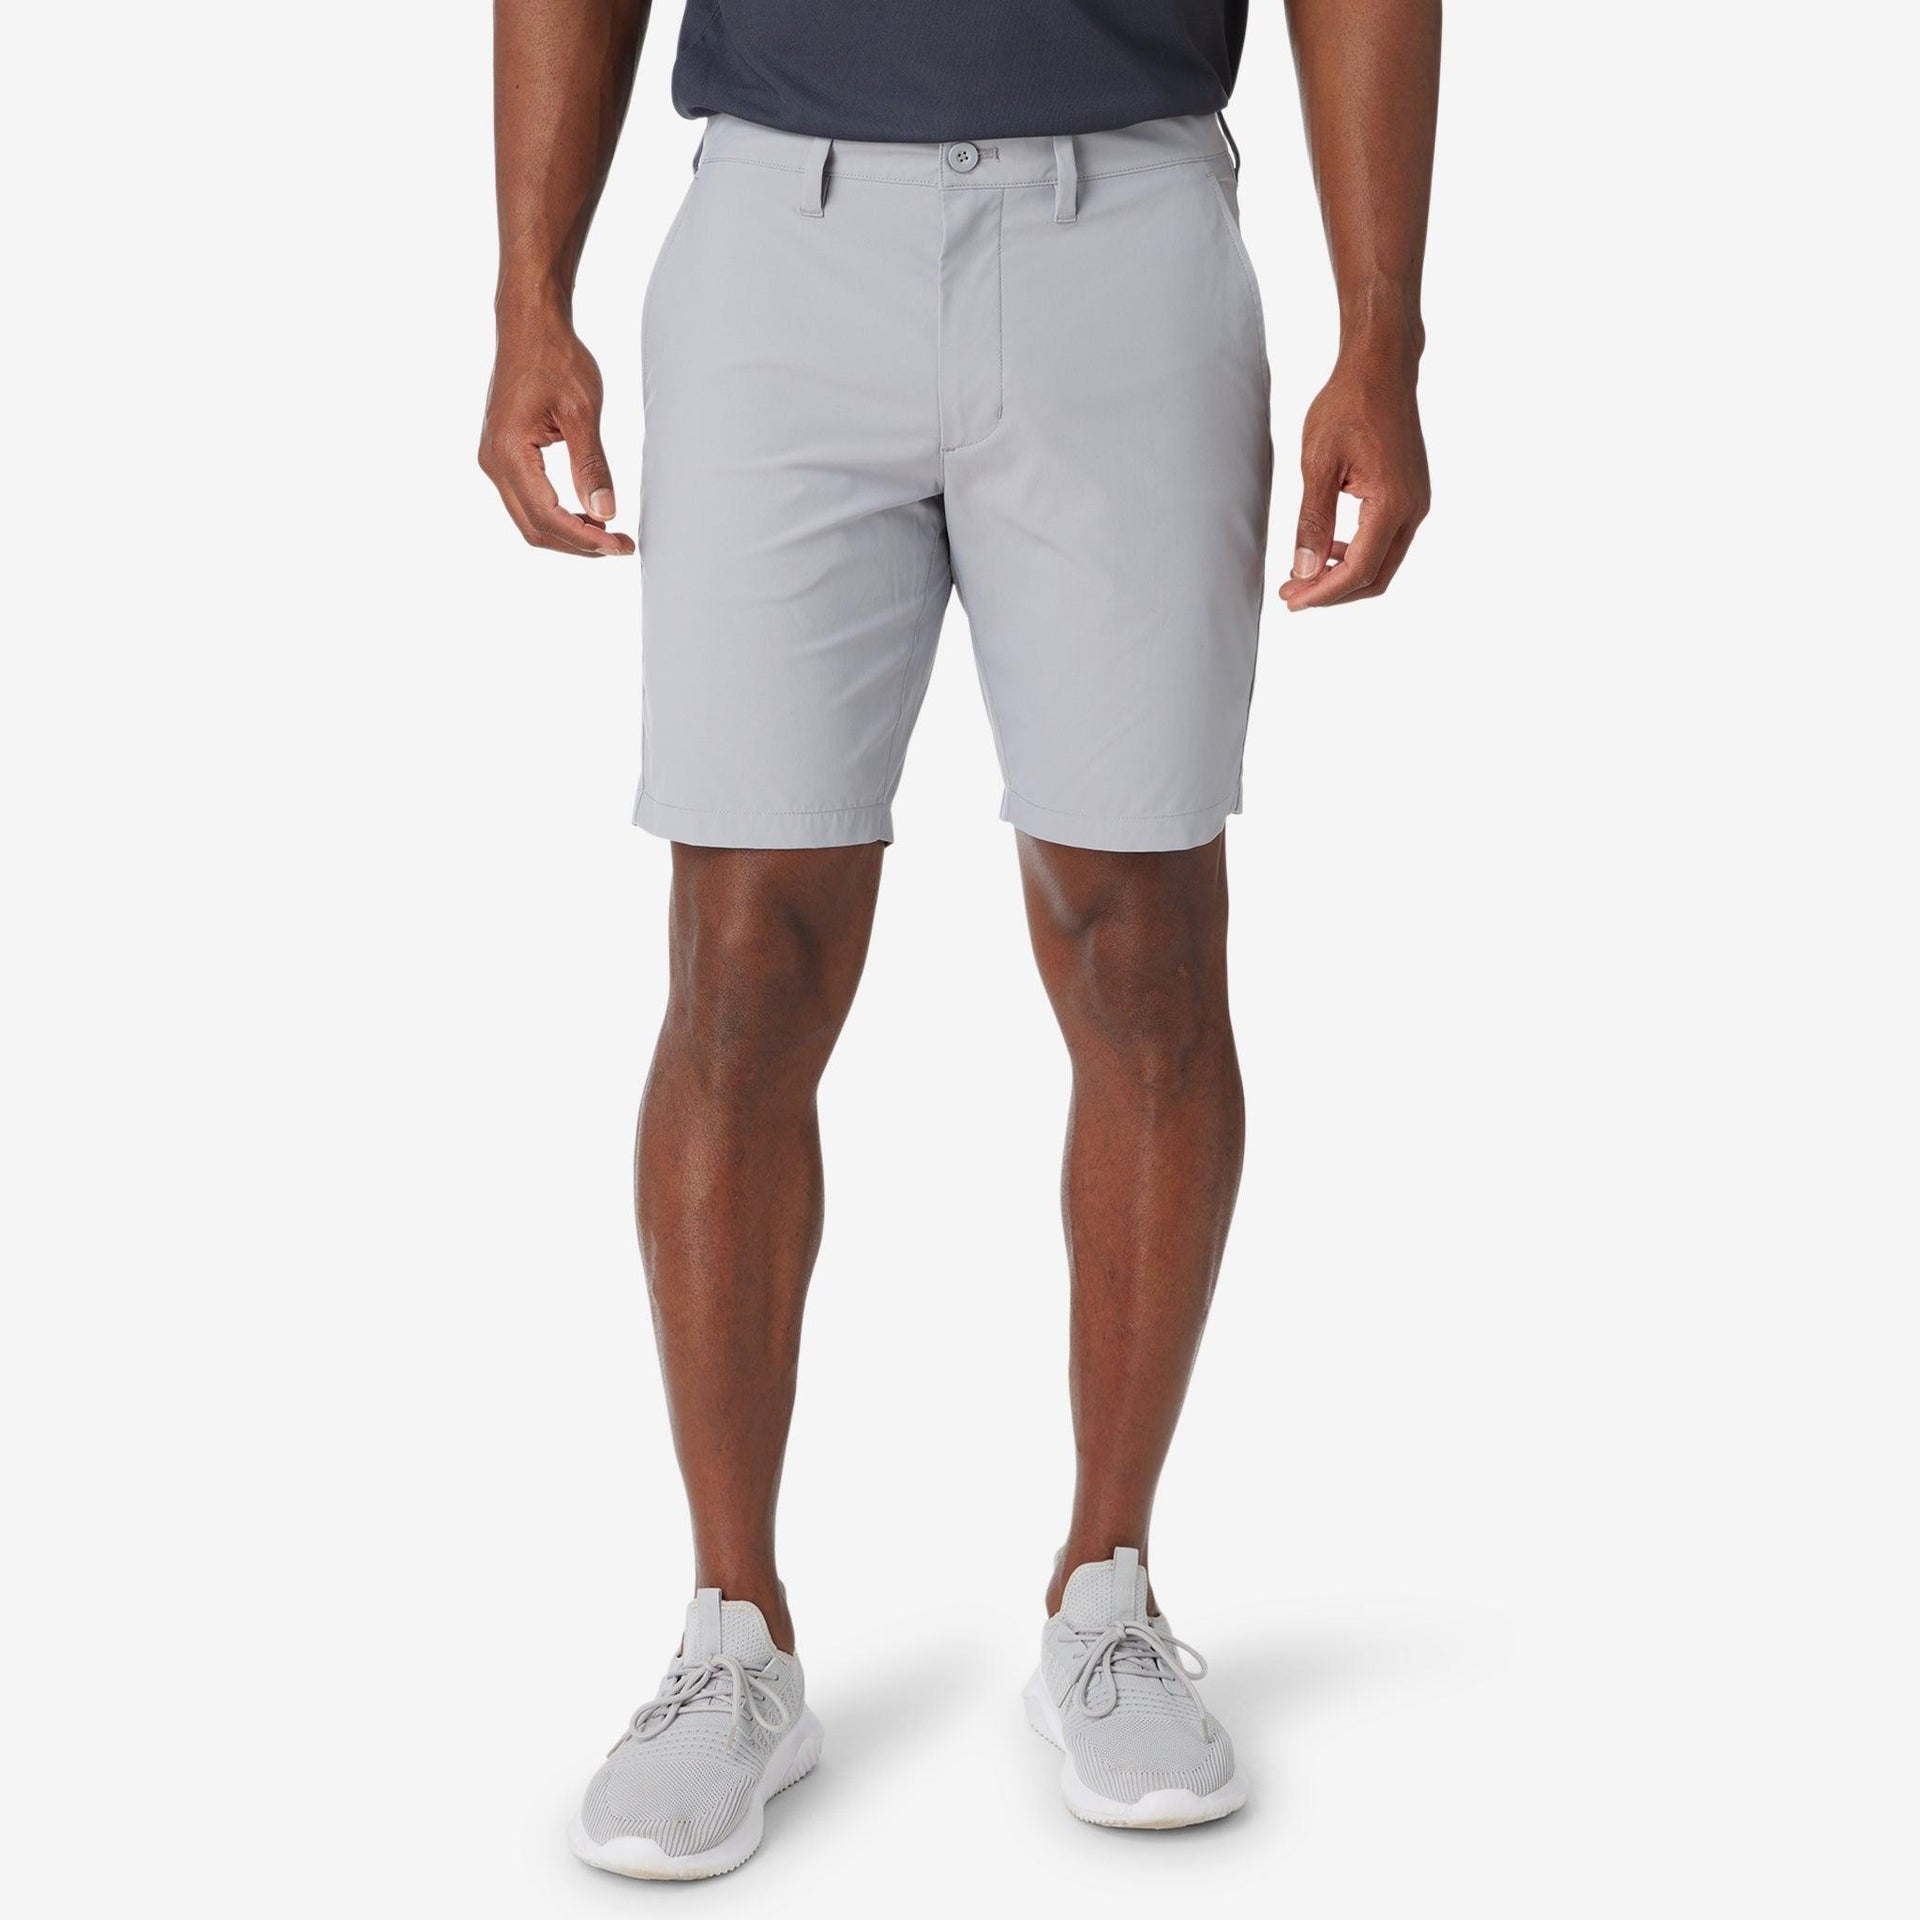 clubhouse short Gray 34